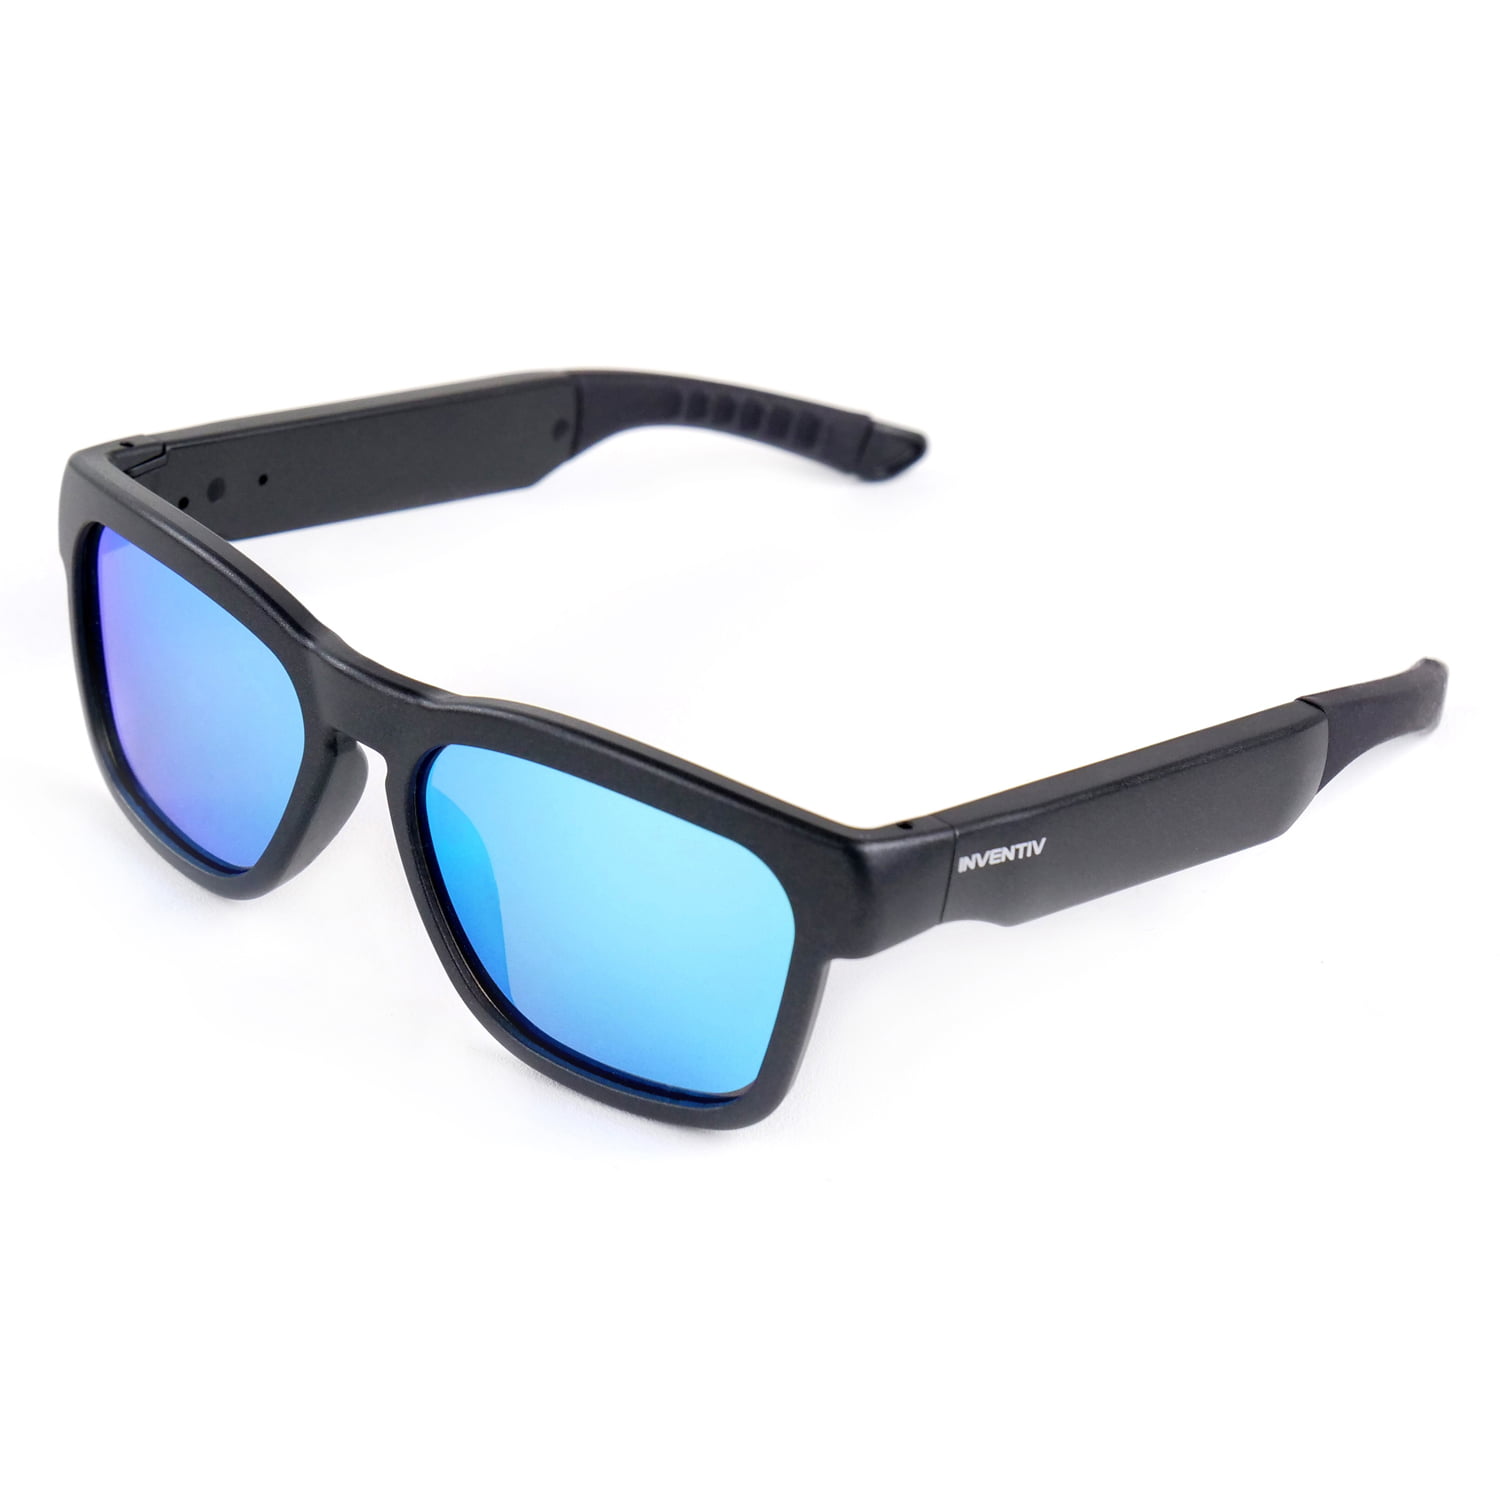 Details about    Walking  Wireless Bluetooth Sunglasses listen to music talk over the phone  